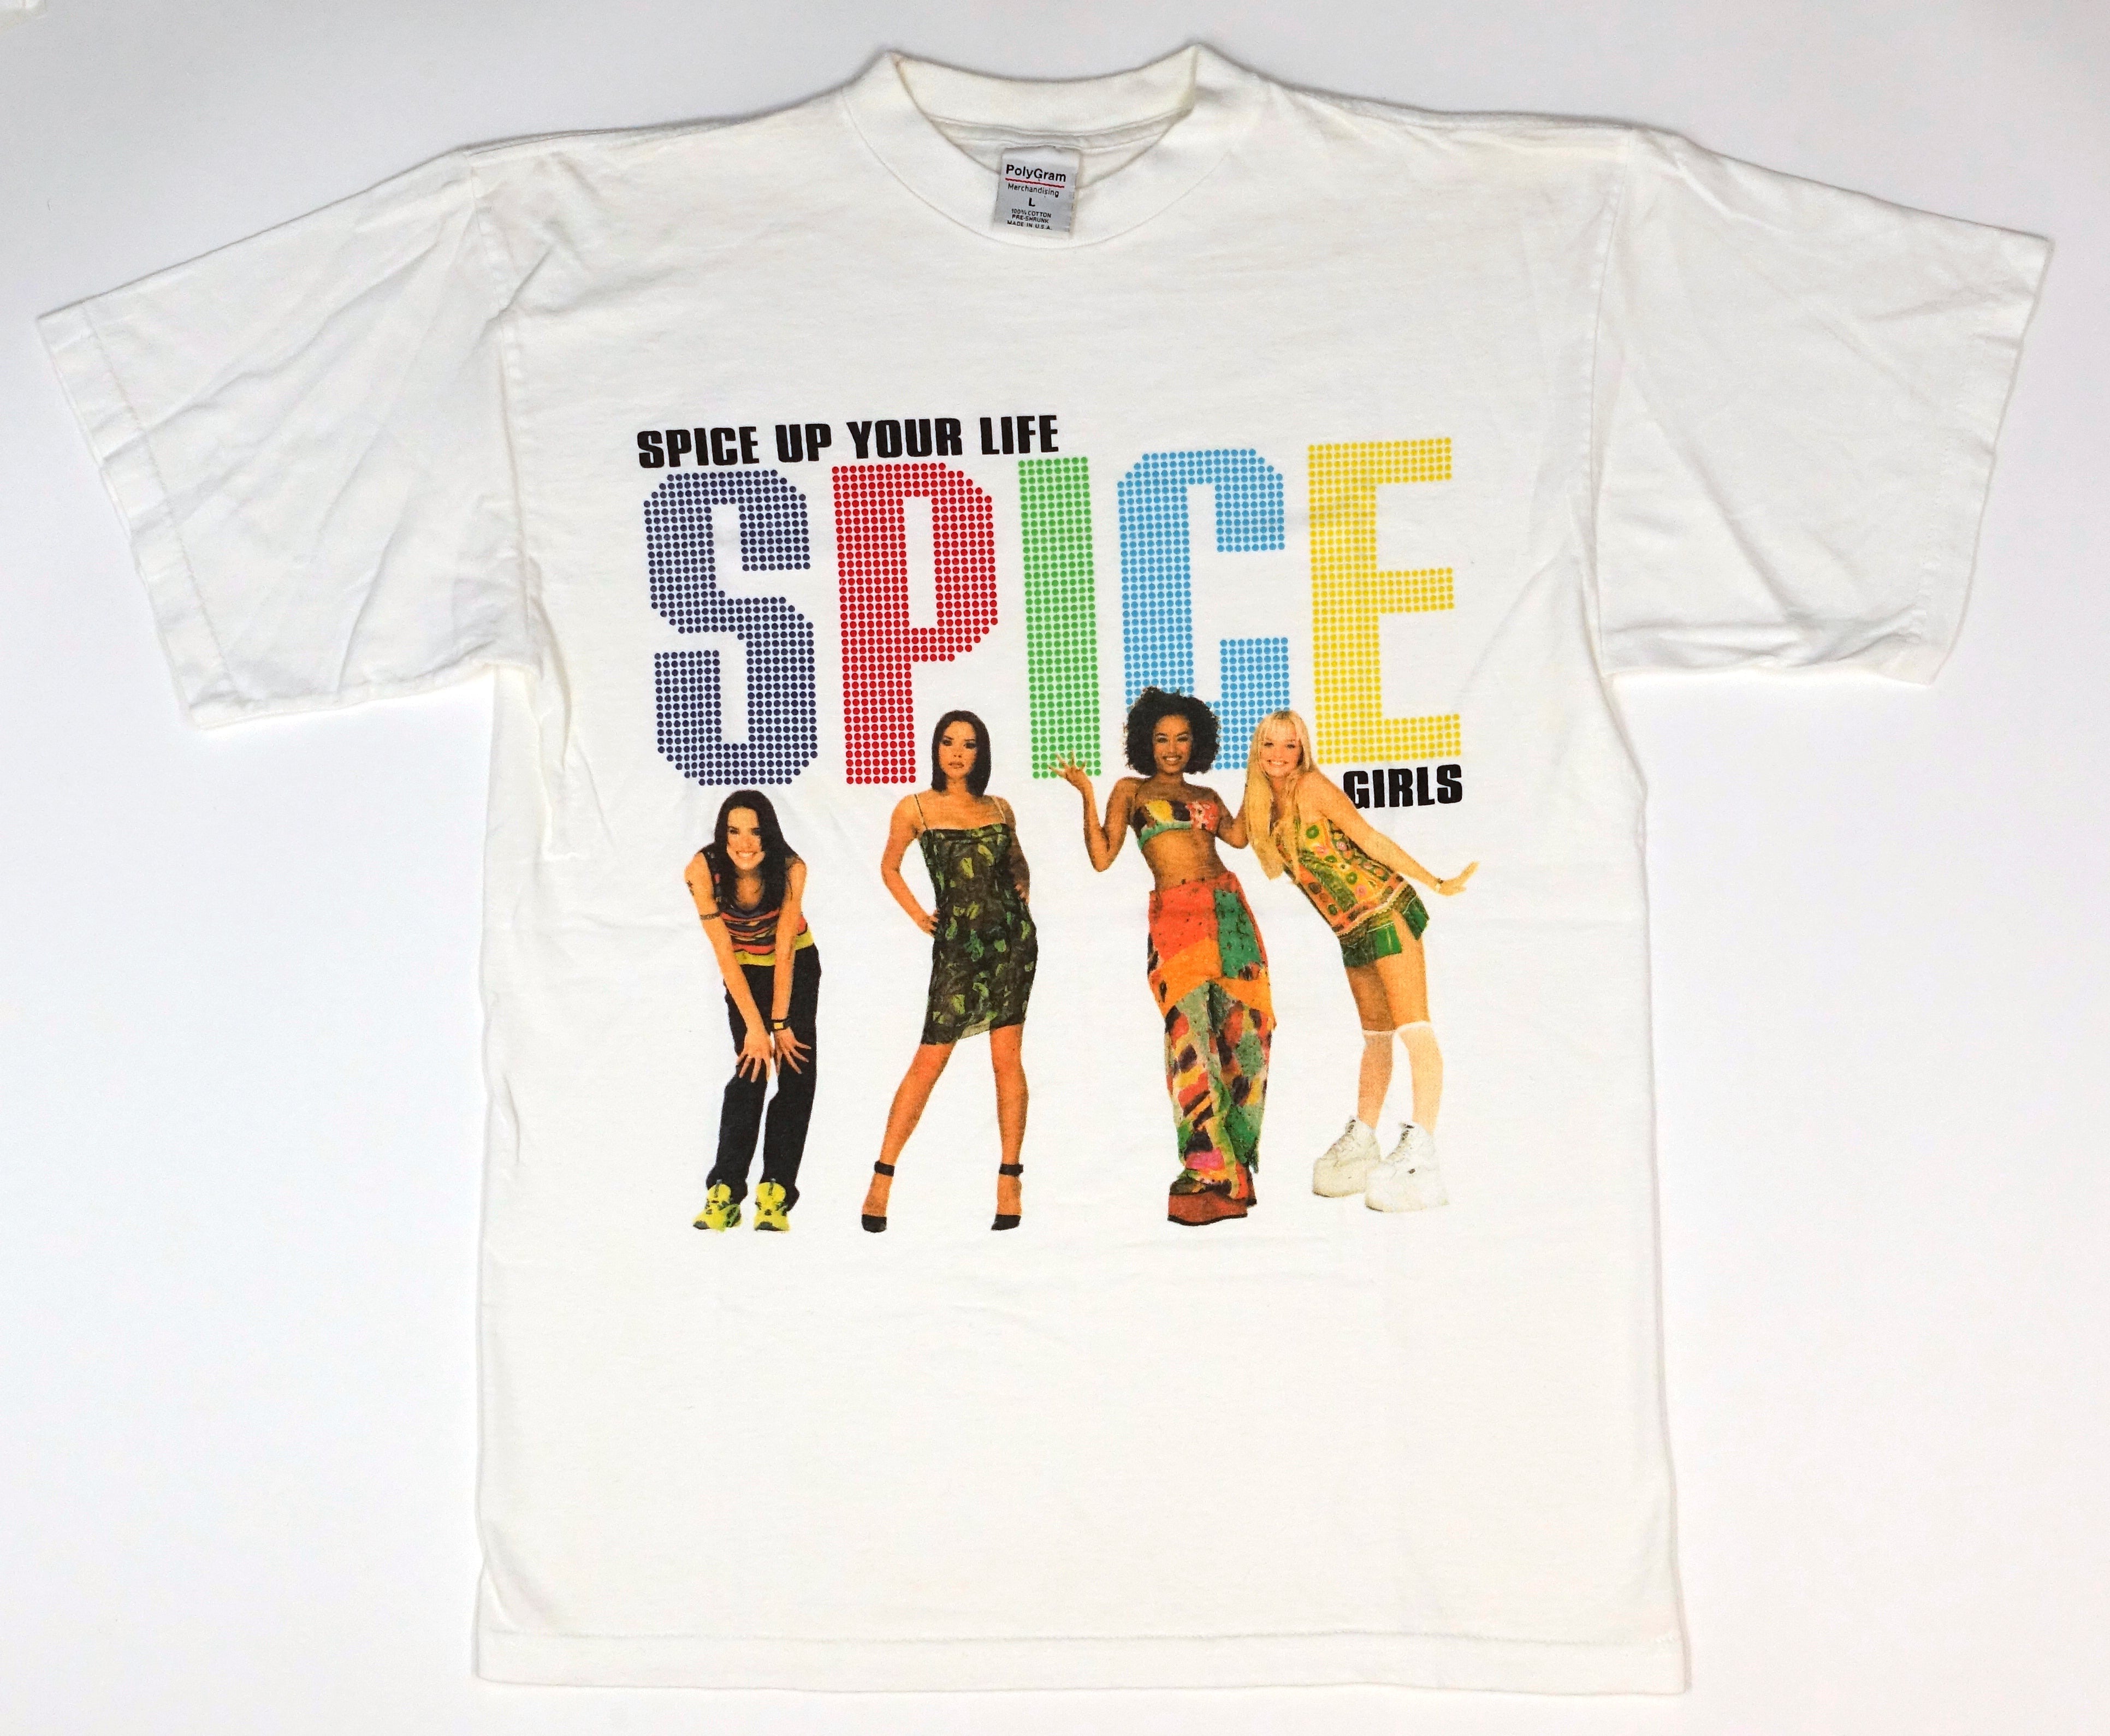 Spice Girls - Spice Up Your Life Tour Shirt Size Large